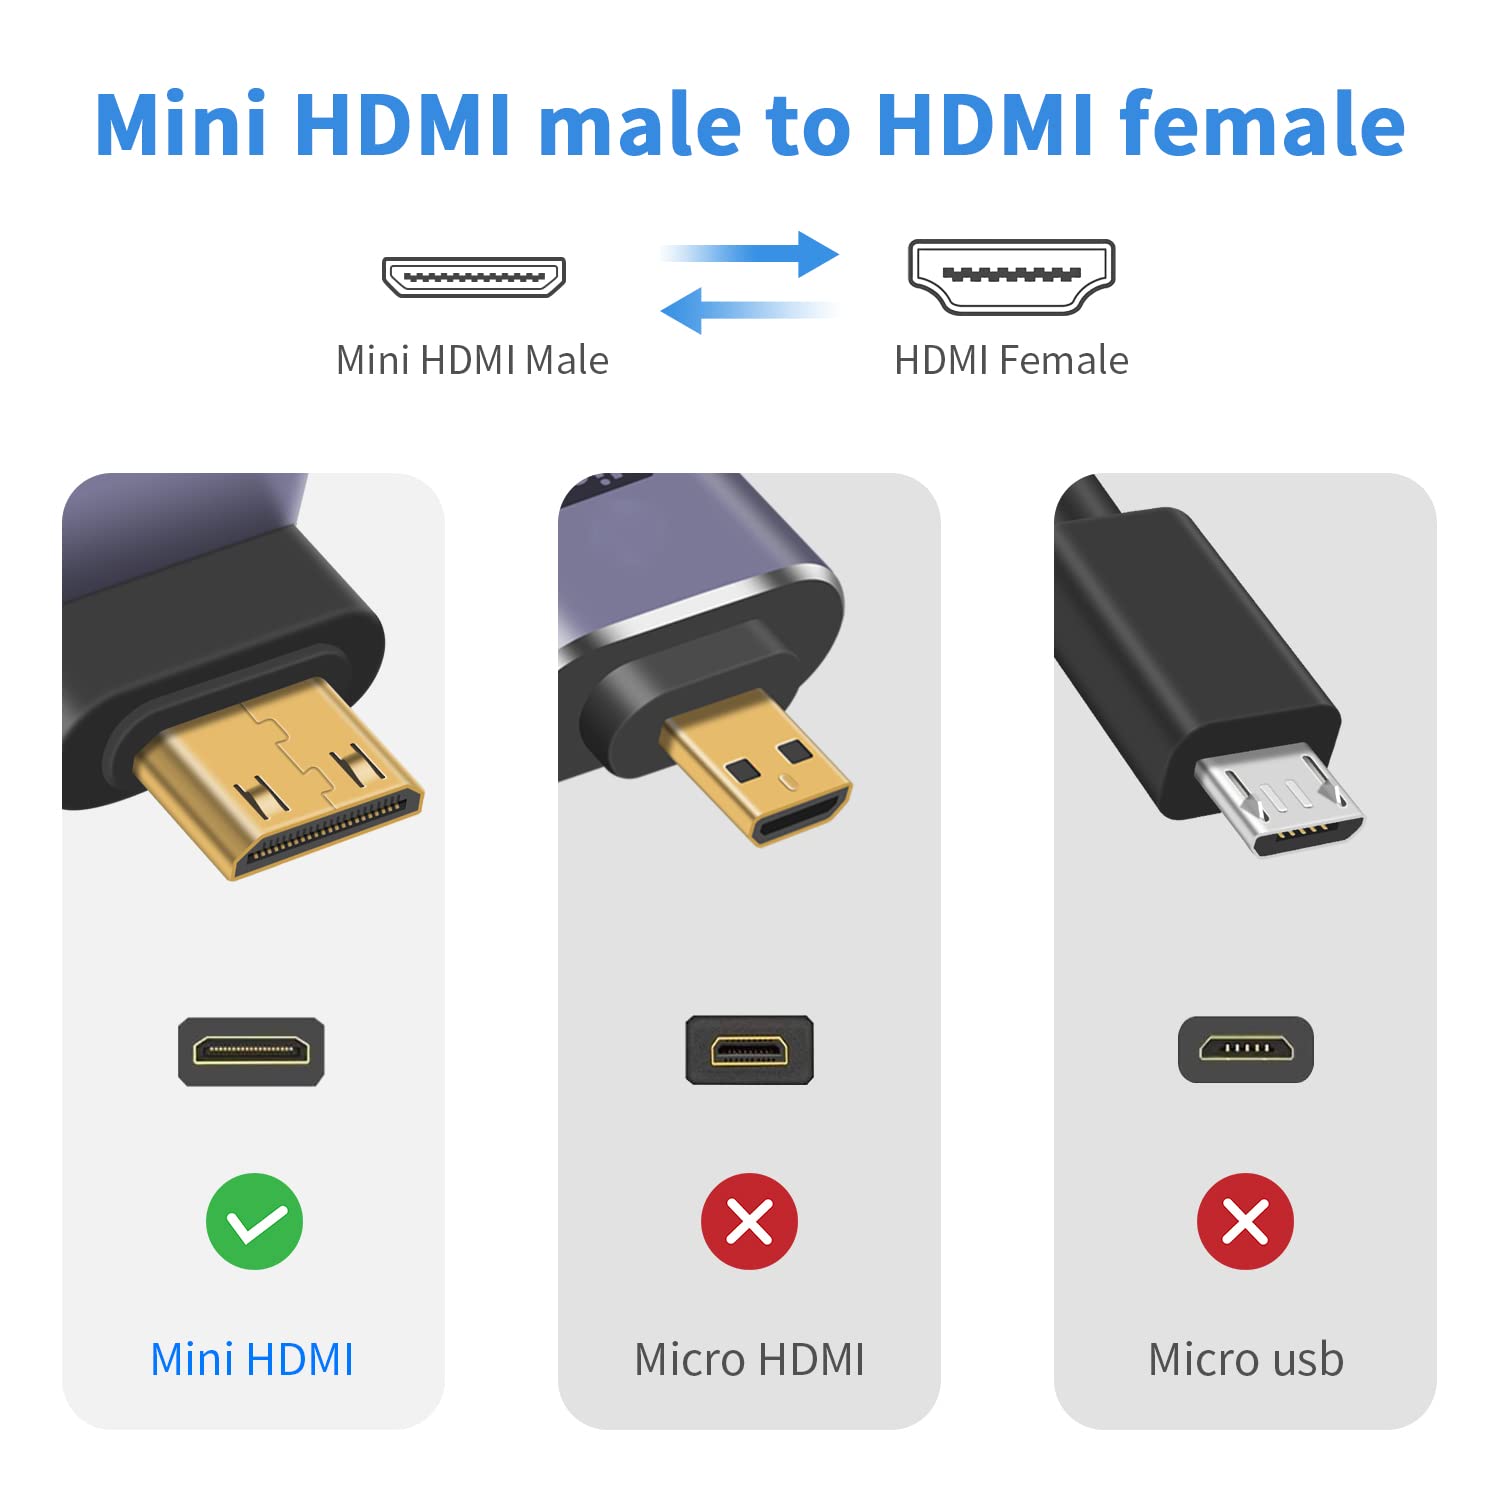 Duttek 8K Mini HDMI to HDMI Adapter, 48Gbps HDMI to Mini HDMI Extender Adapter, Down Angled Mini HDMI Male to HDMI Female Converter with LED Working Indicator Lamp, for Camera, Camcorder (2 Pack)